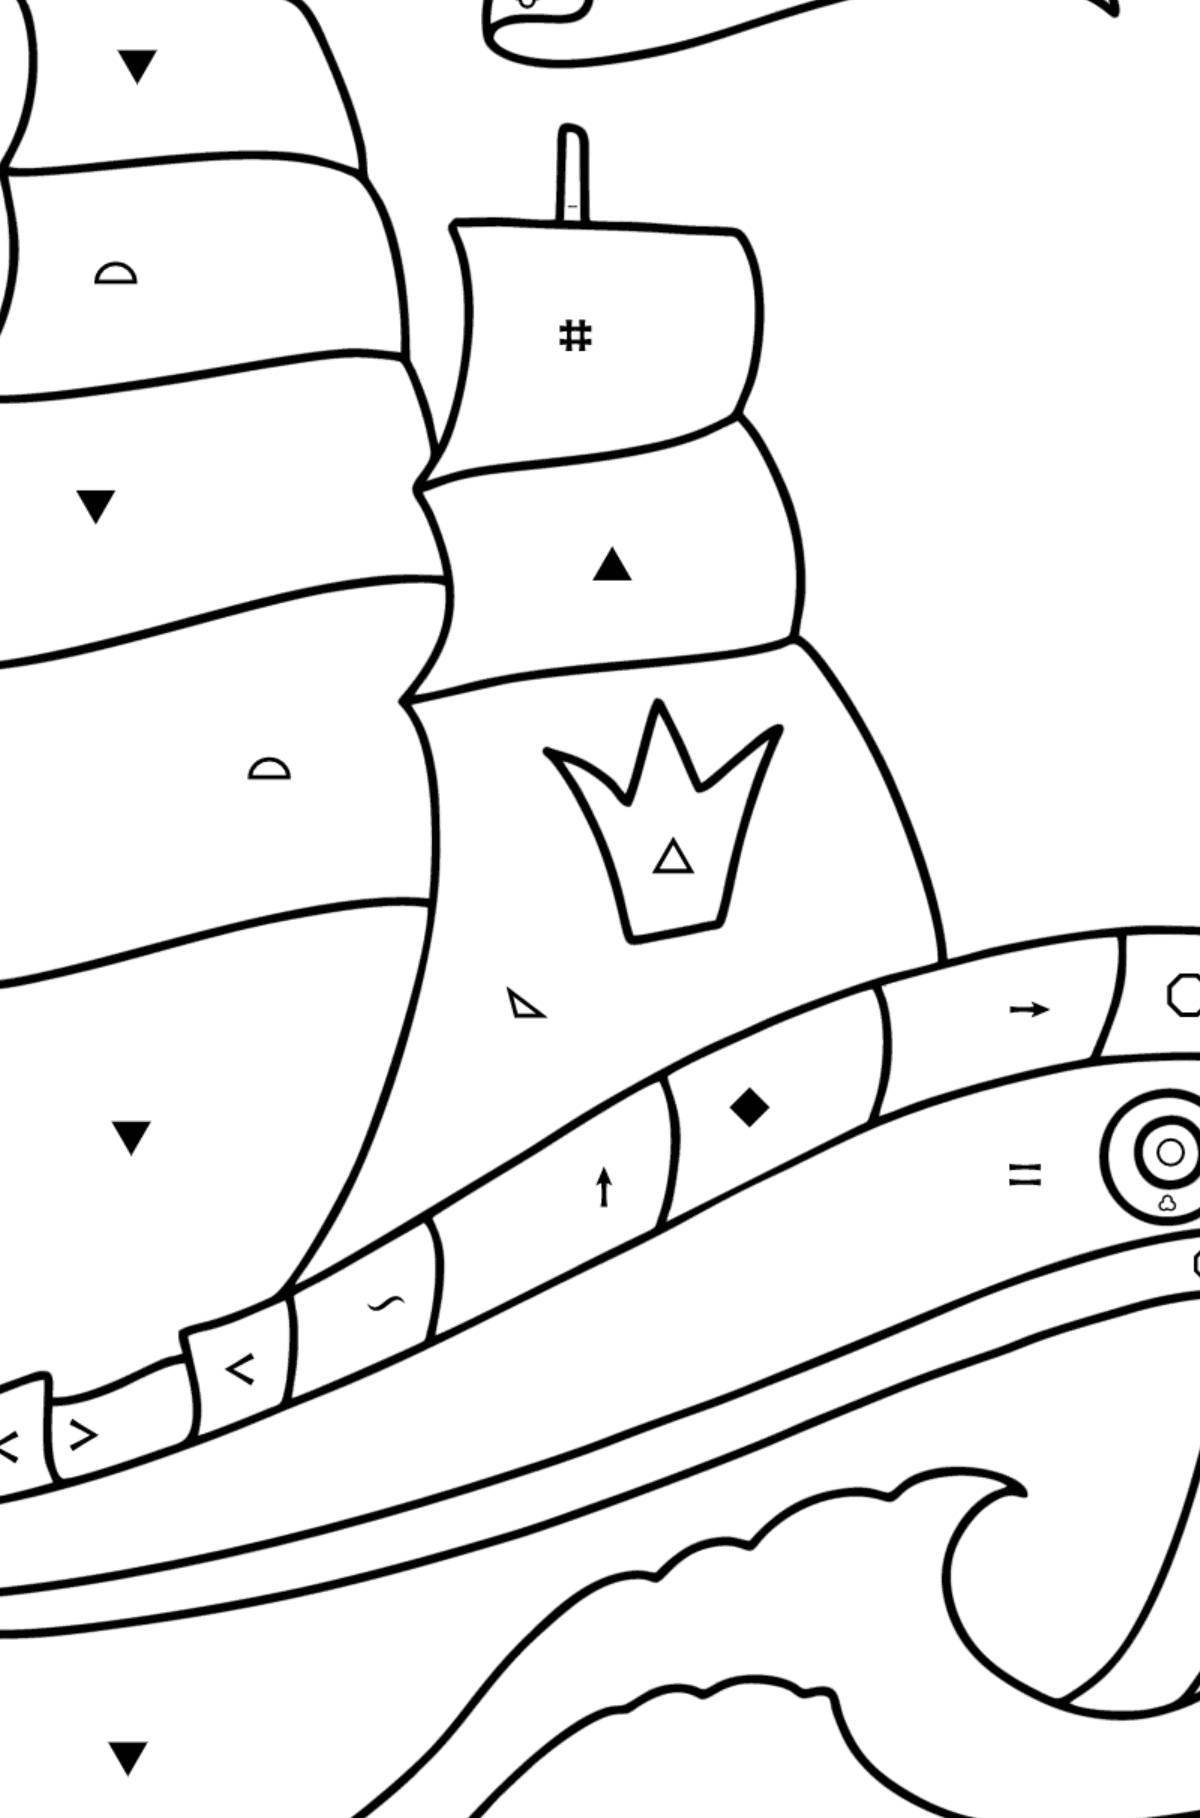 Radiant coloring page ship with sails